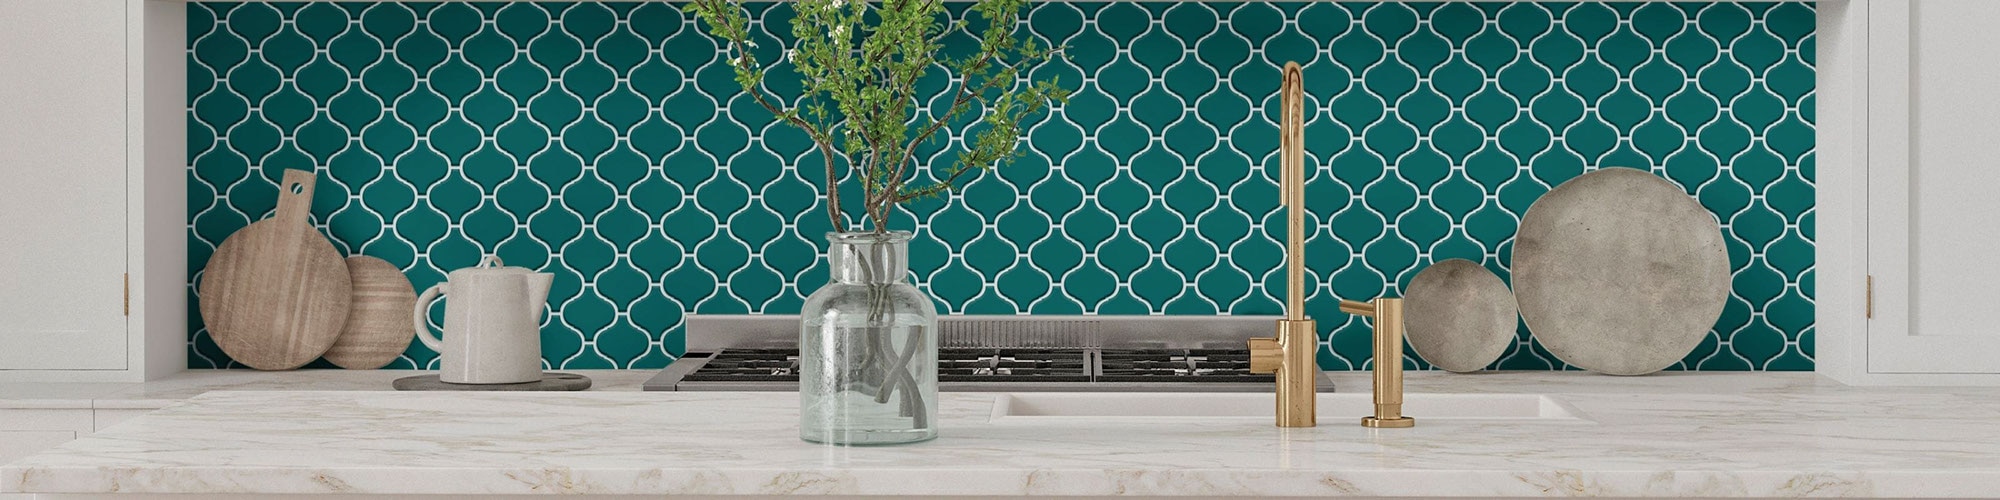 Bold kitchen décor with cream marble island countertop and bright teal arabesque mosaic tile backsplash.